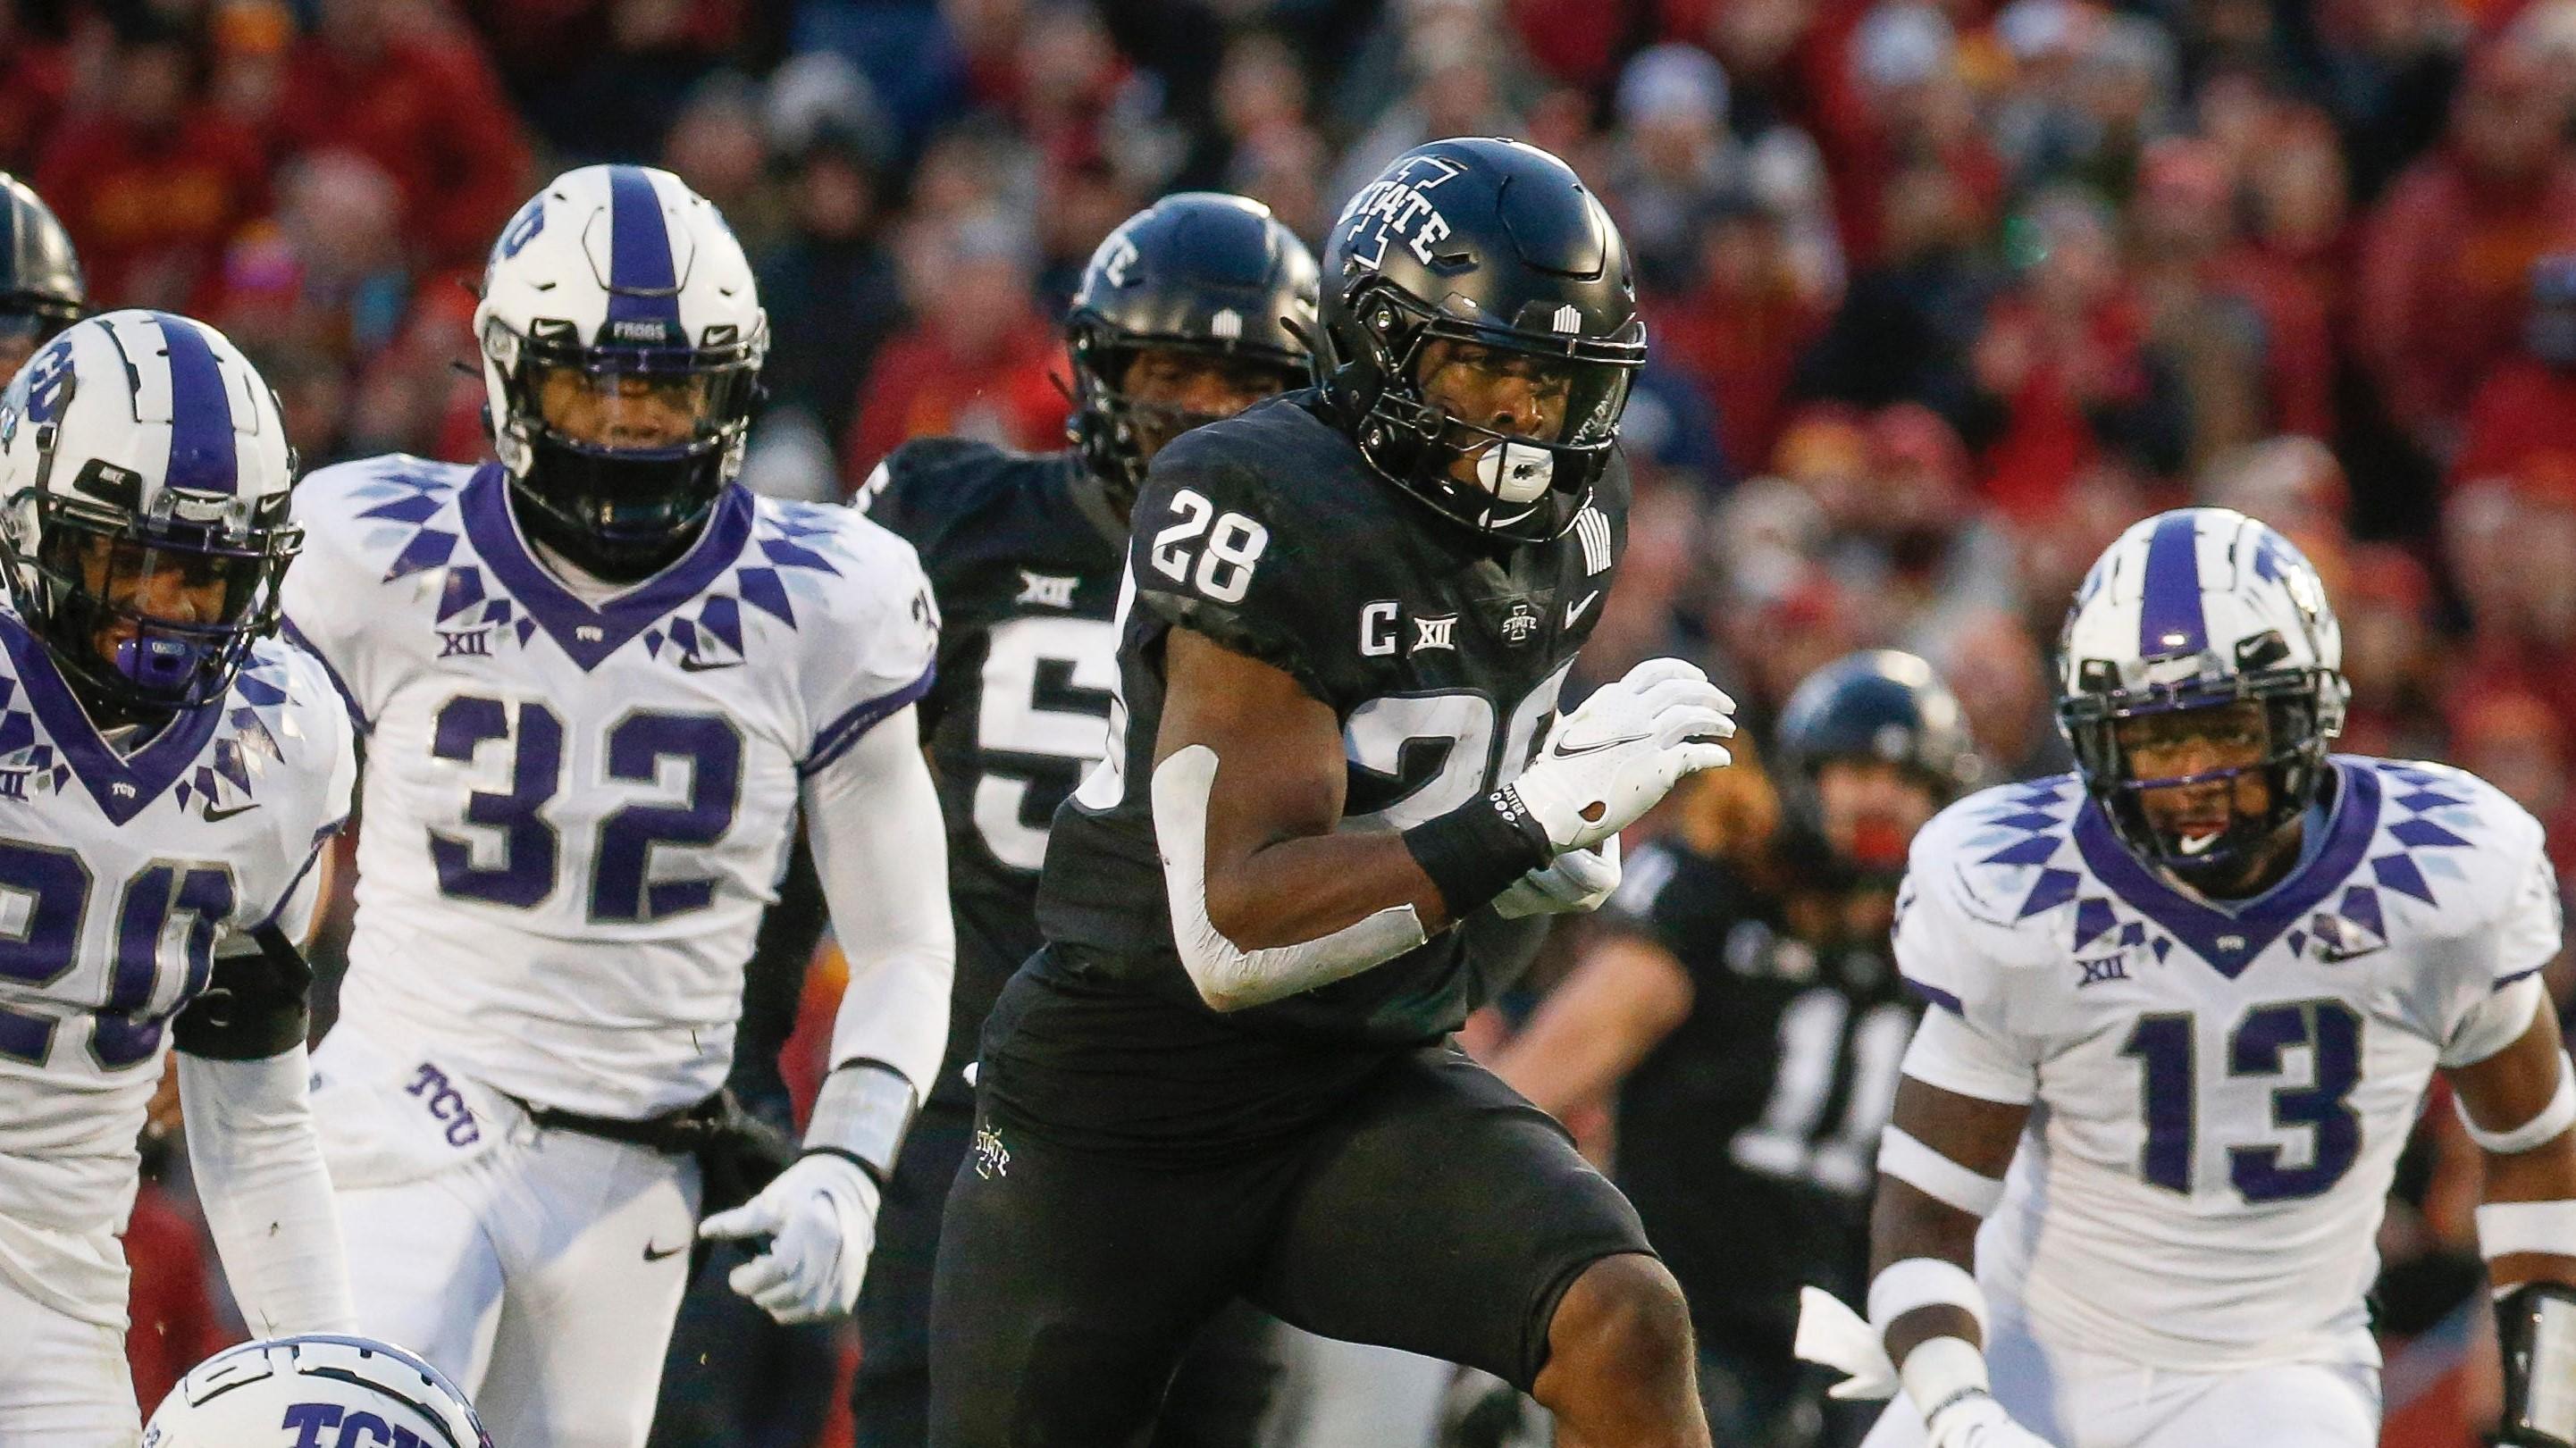 Iowa State junior running back Breece Hall breaks the tackle of TCU safety Nook Bradford en route to the end zone for a touchdown in the second quarter / Bryon Houlgrave/The Register-USA TODAY NETWORK